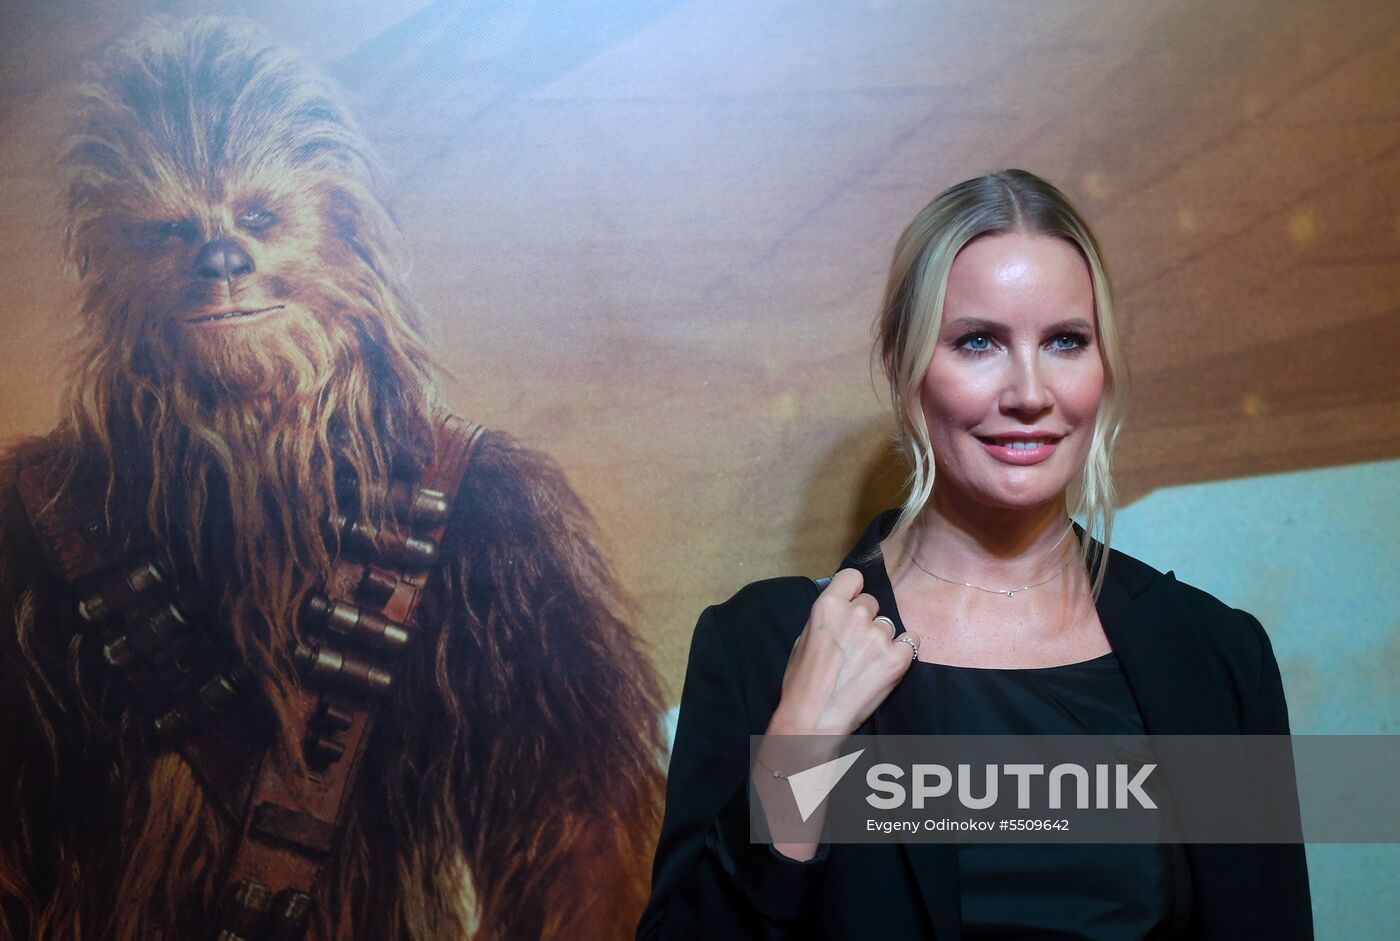 Moscow premiere of Solo: A Star Wars Story